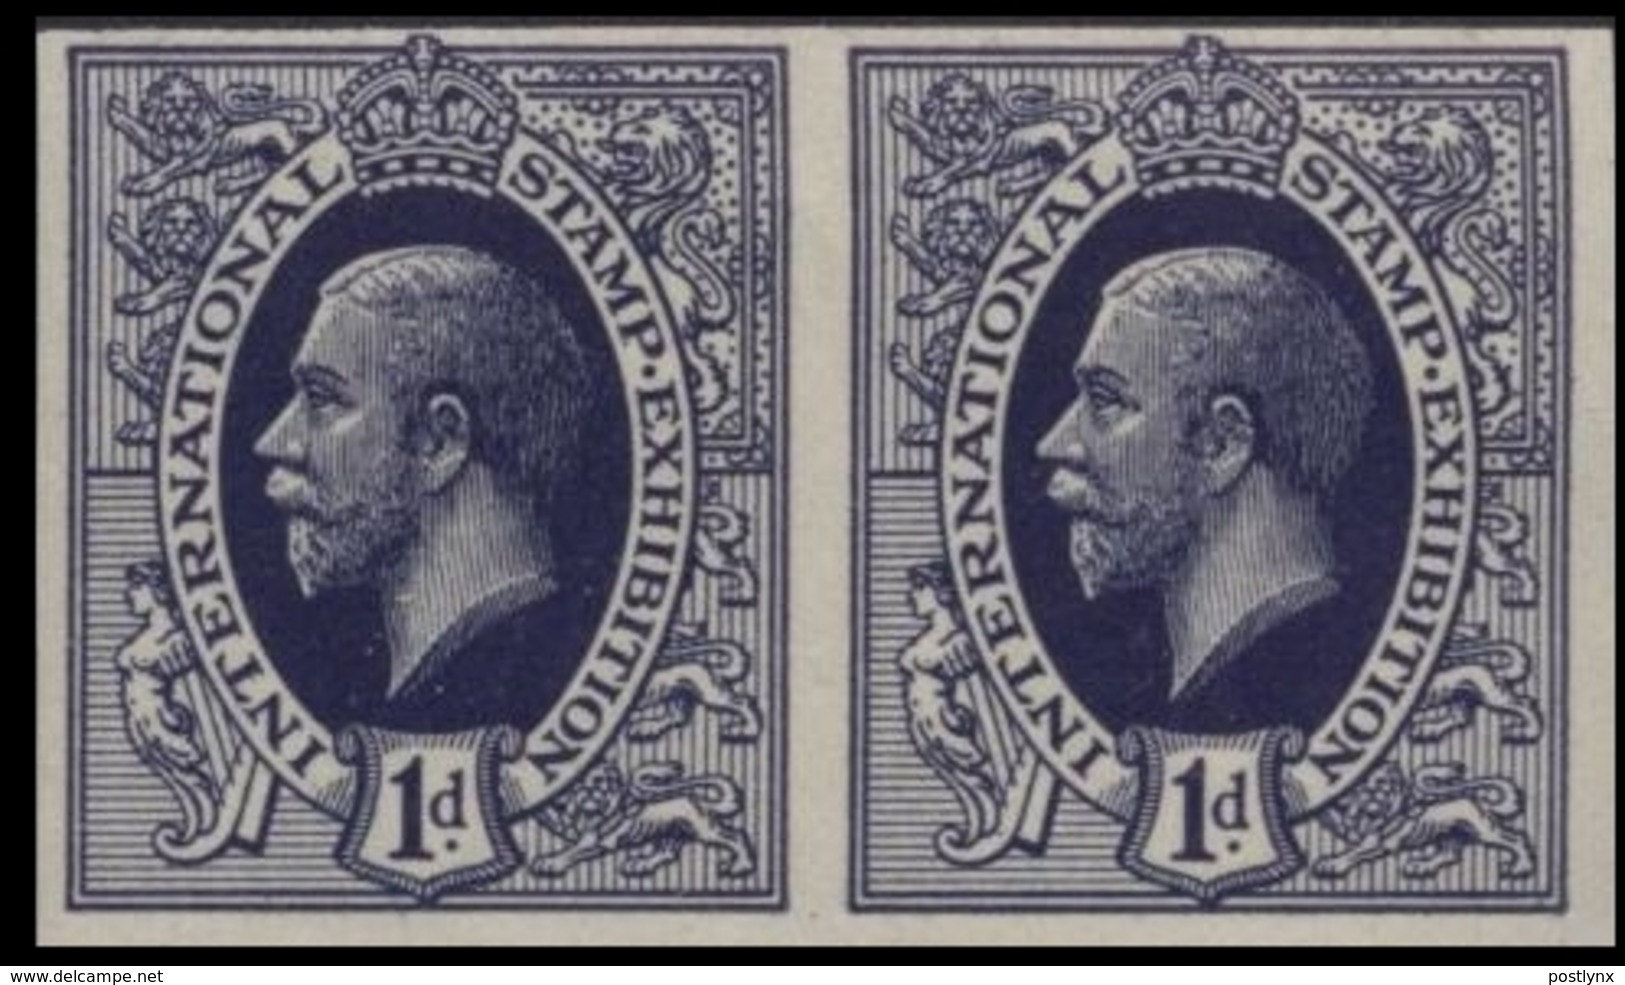 GREAT BRITAIN 1912 George V Dp.Viol.Bl.1d Int.Stamp Exhibition ESSAY IMPERF.PAIR - Essays, Proofs & Reprints